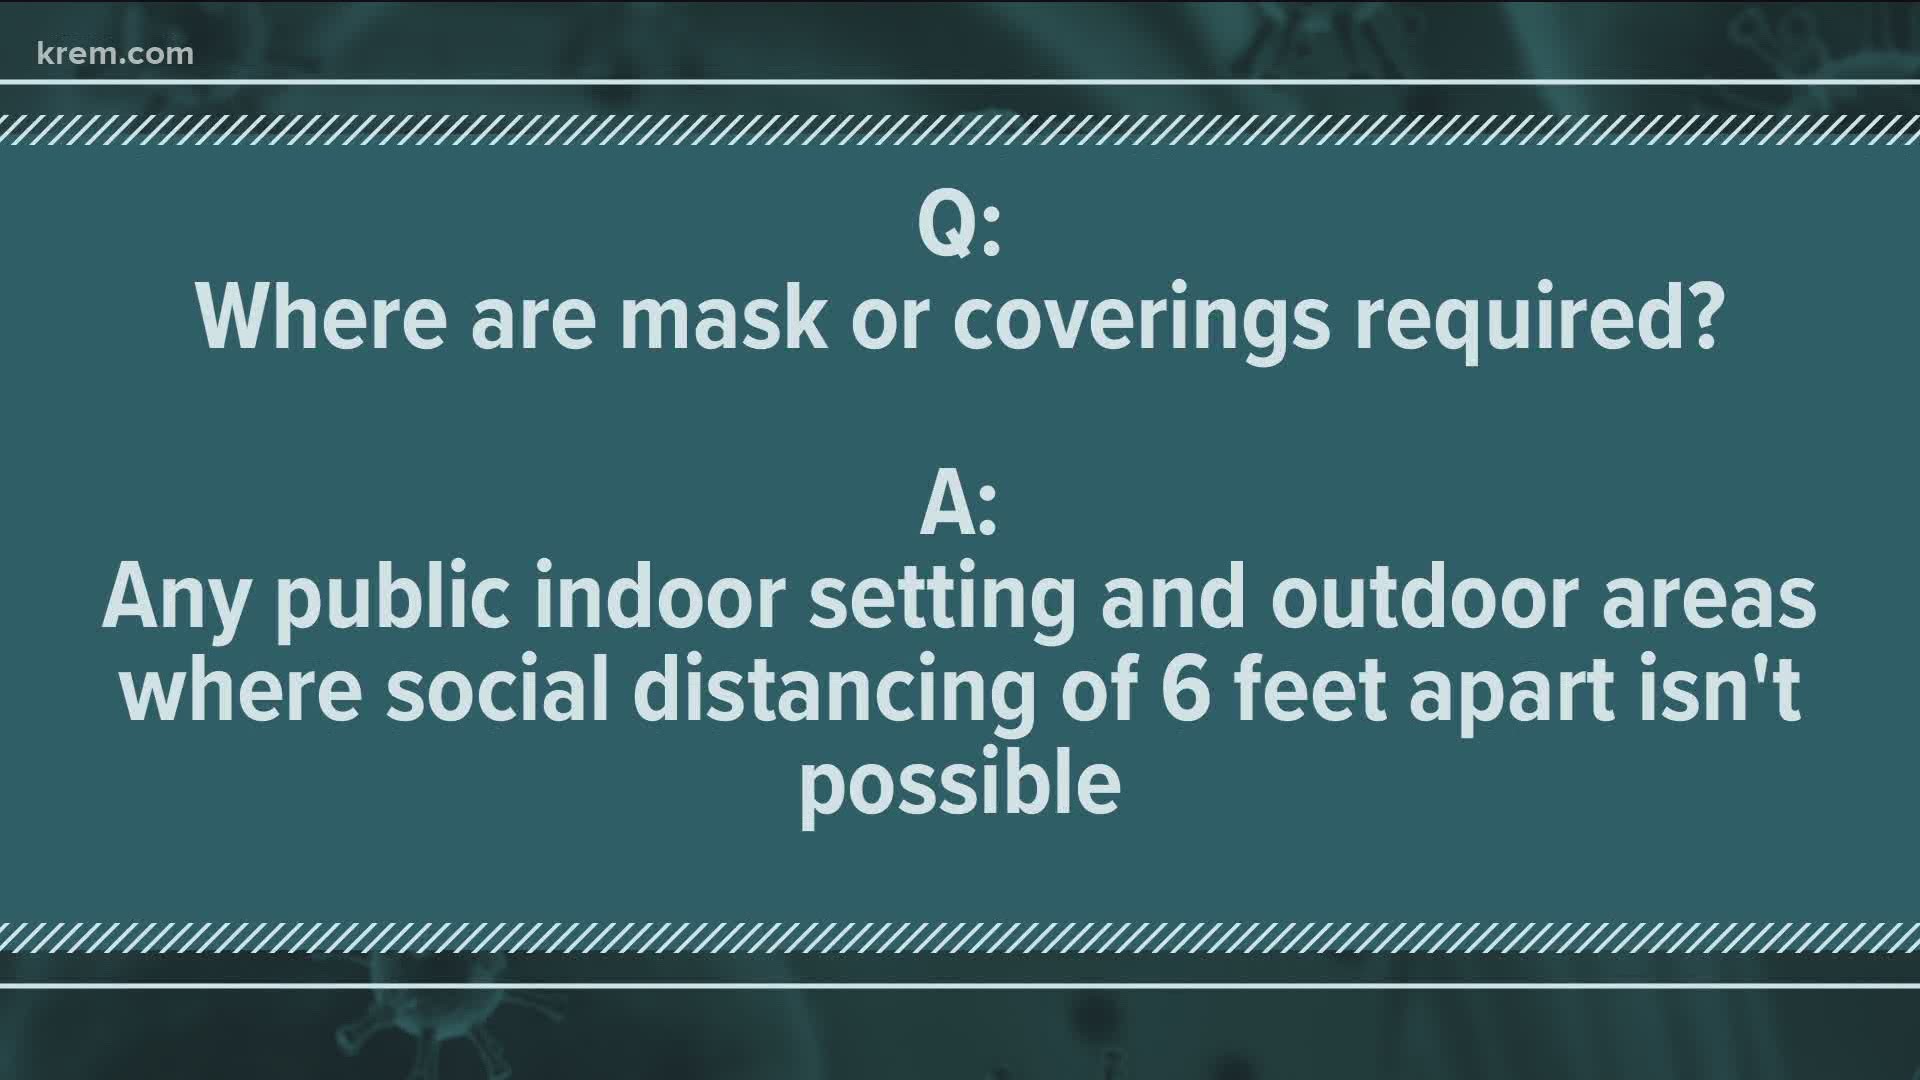 Starting on Friday, face masks are required in Washington in all indoor public spaces and outdoor public spaces where social distancing isn't possible.